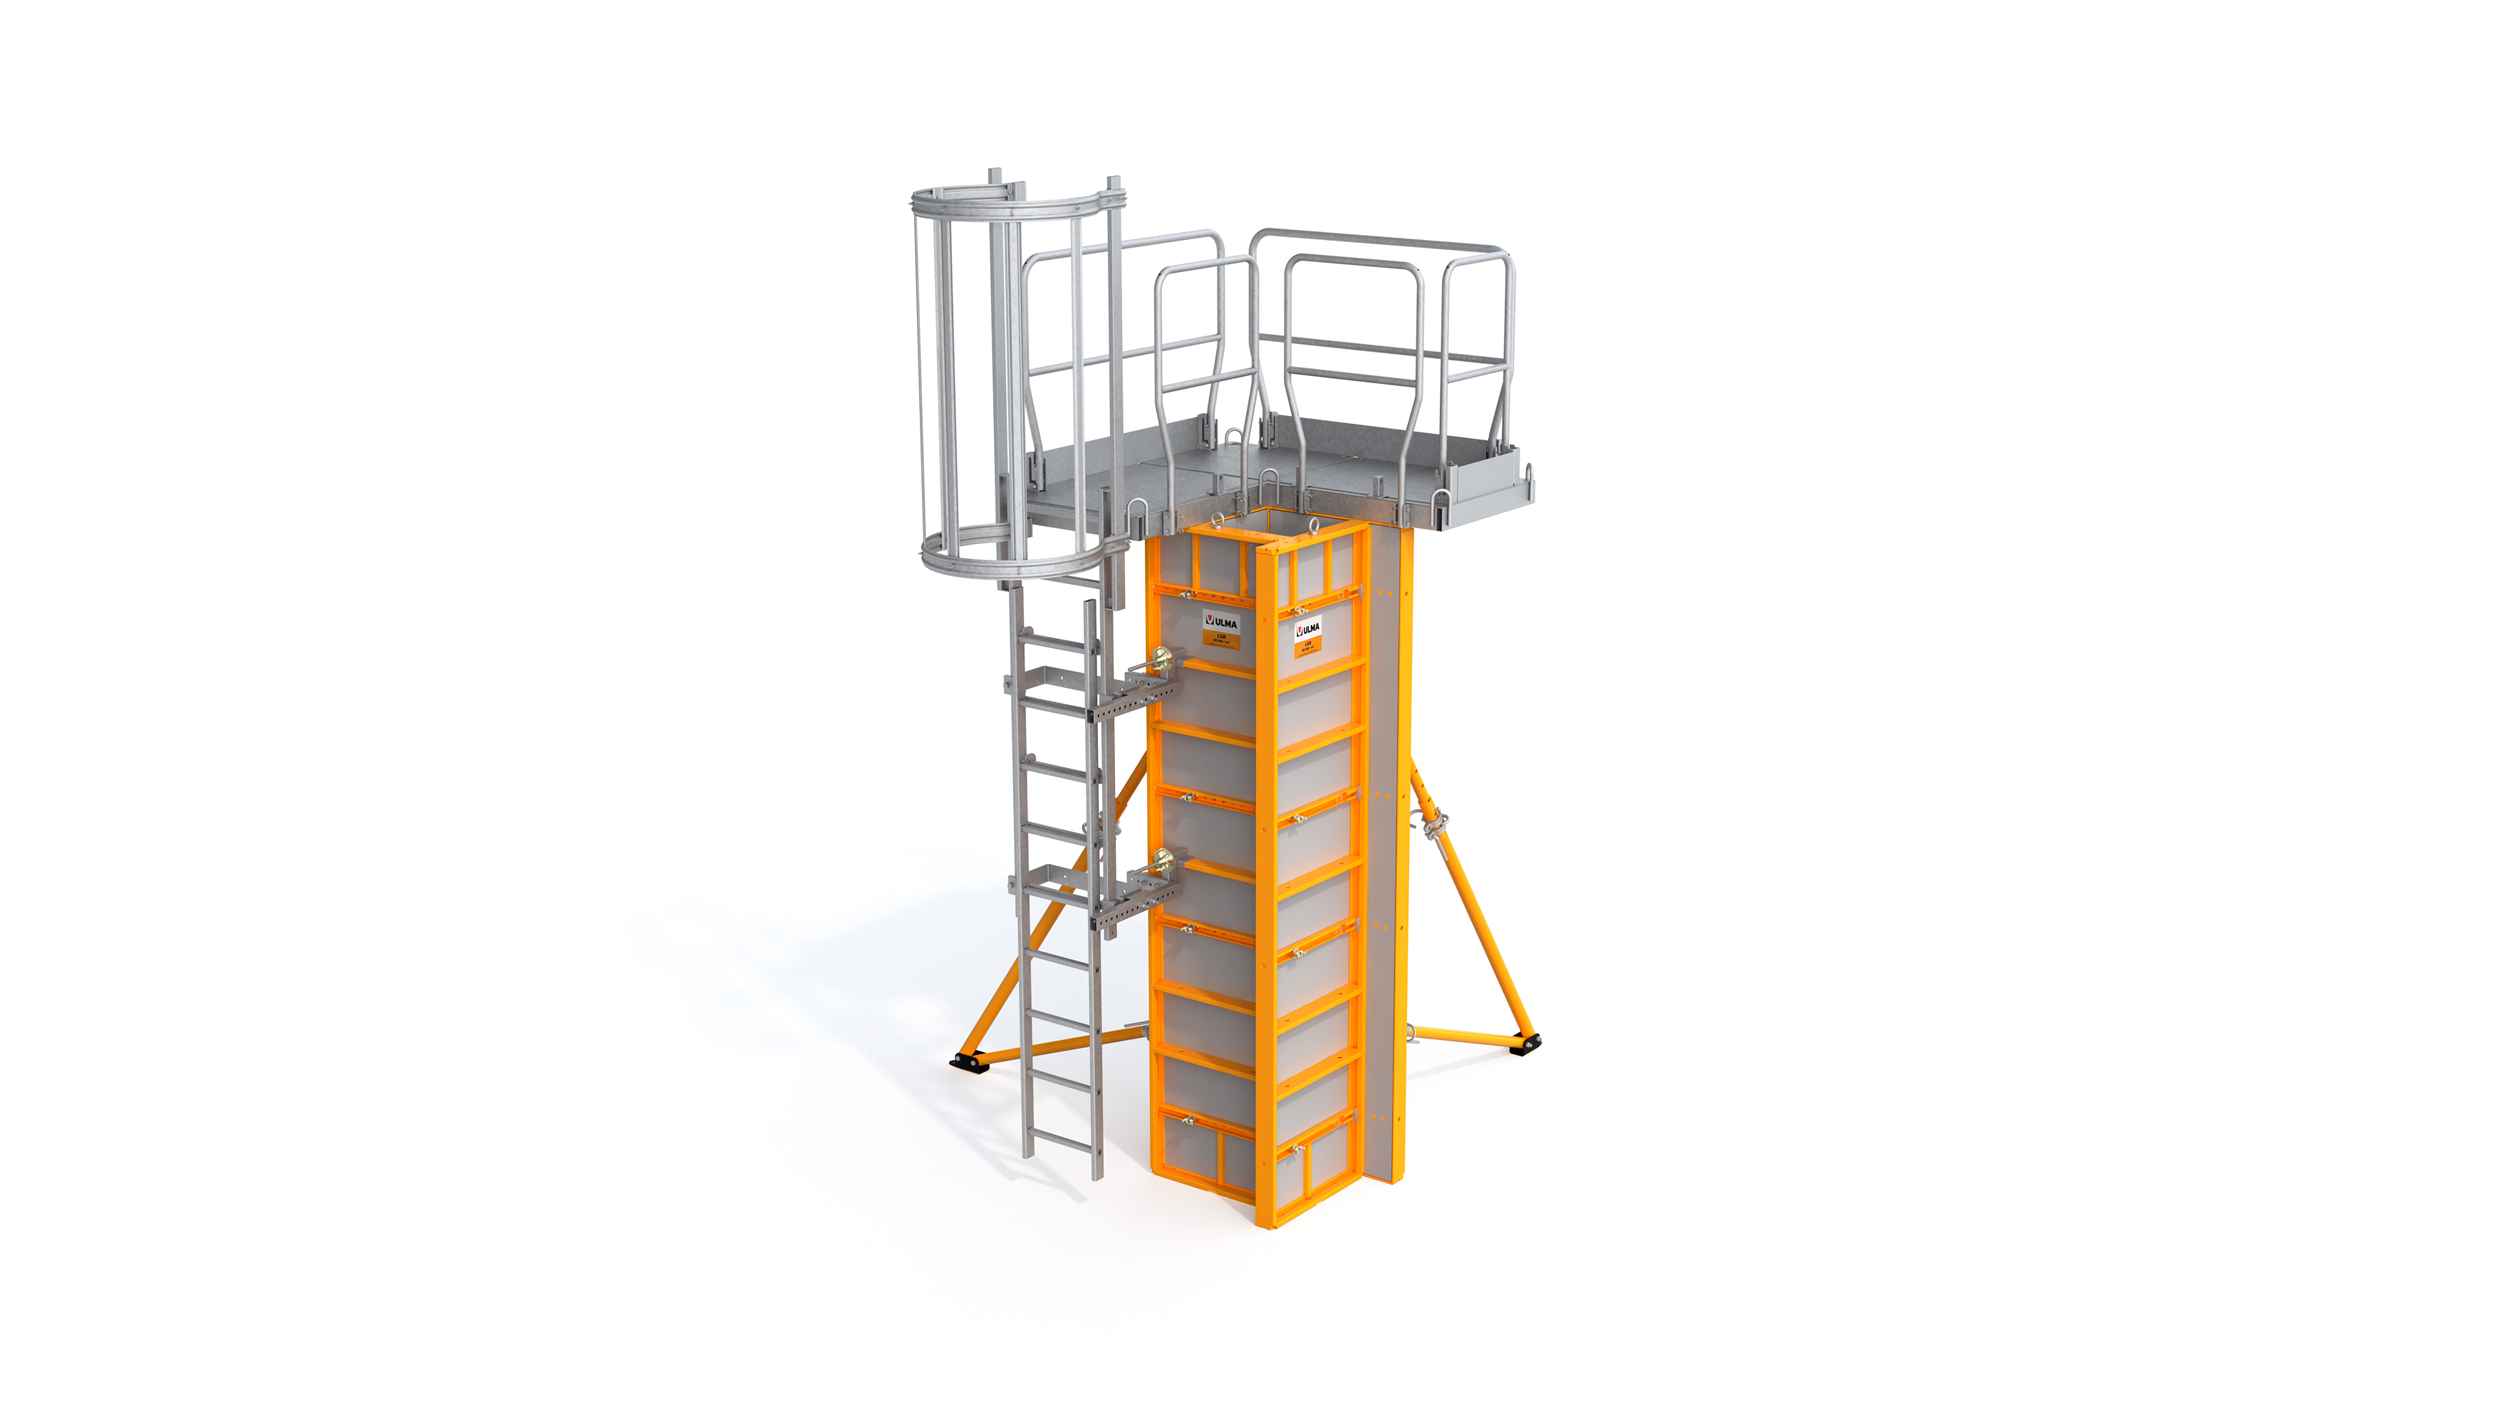 Rectangular section concrete column form. Robust system with a wide panel range. Reduced number of components.